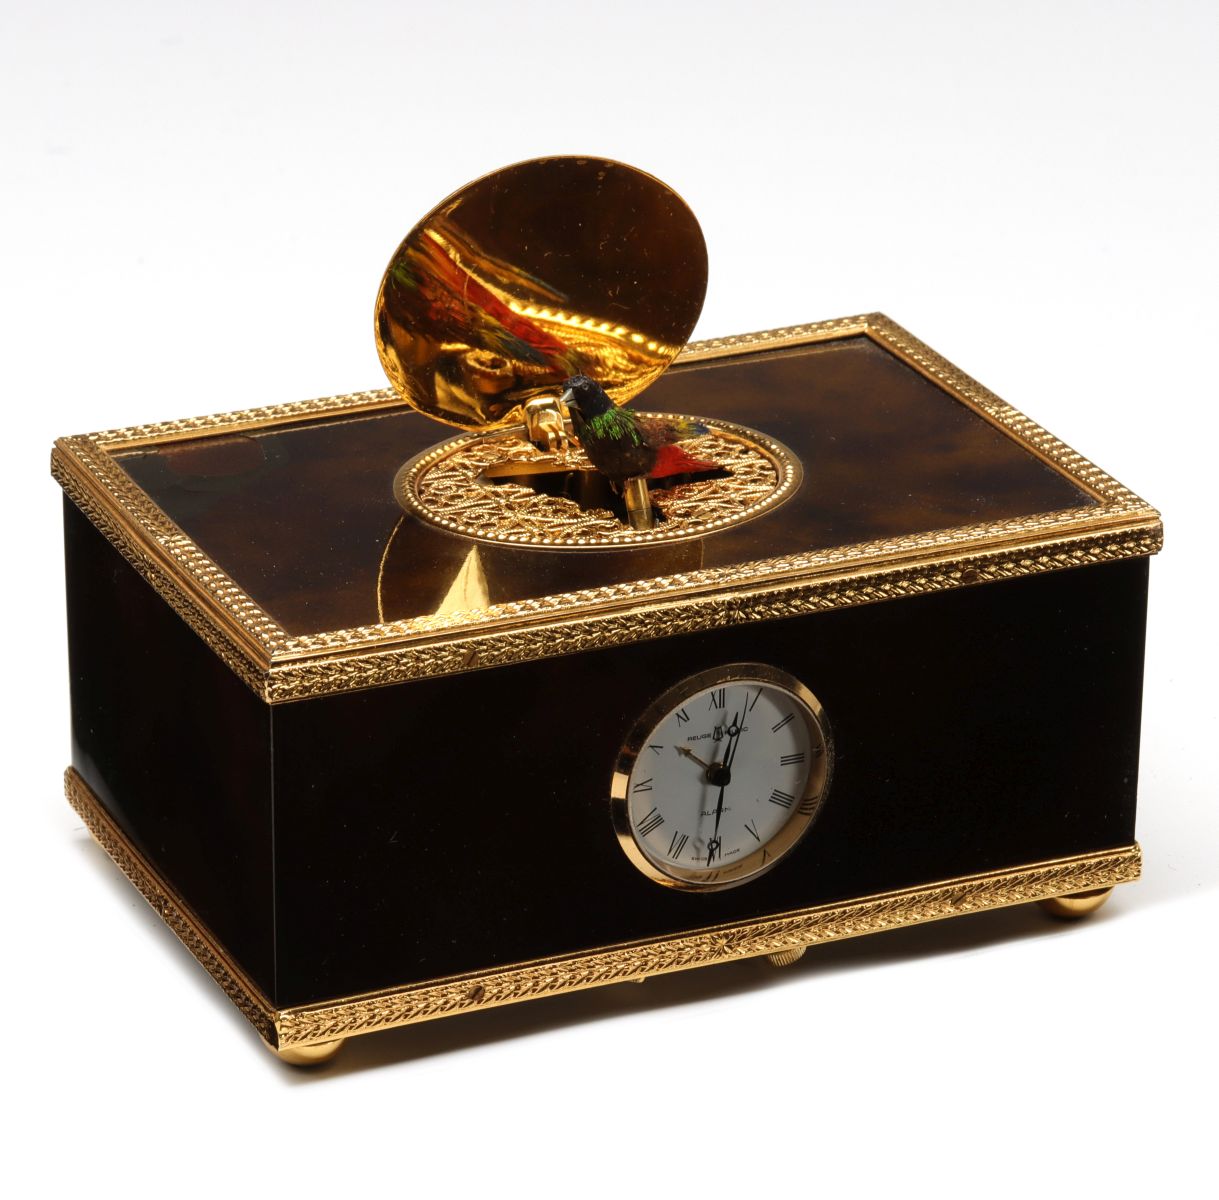 A REUGE ENAMELED MUSIC BOX WITH BIRD AUTOMATON AND CLOCK